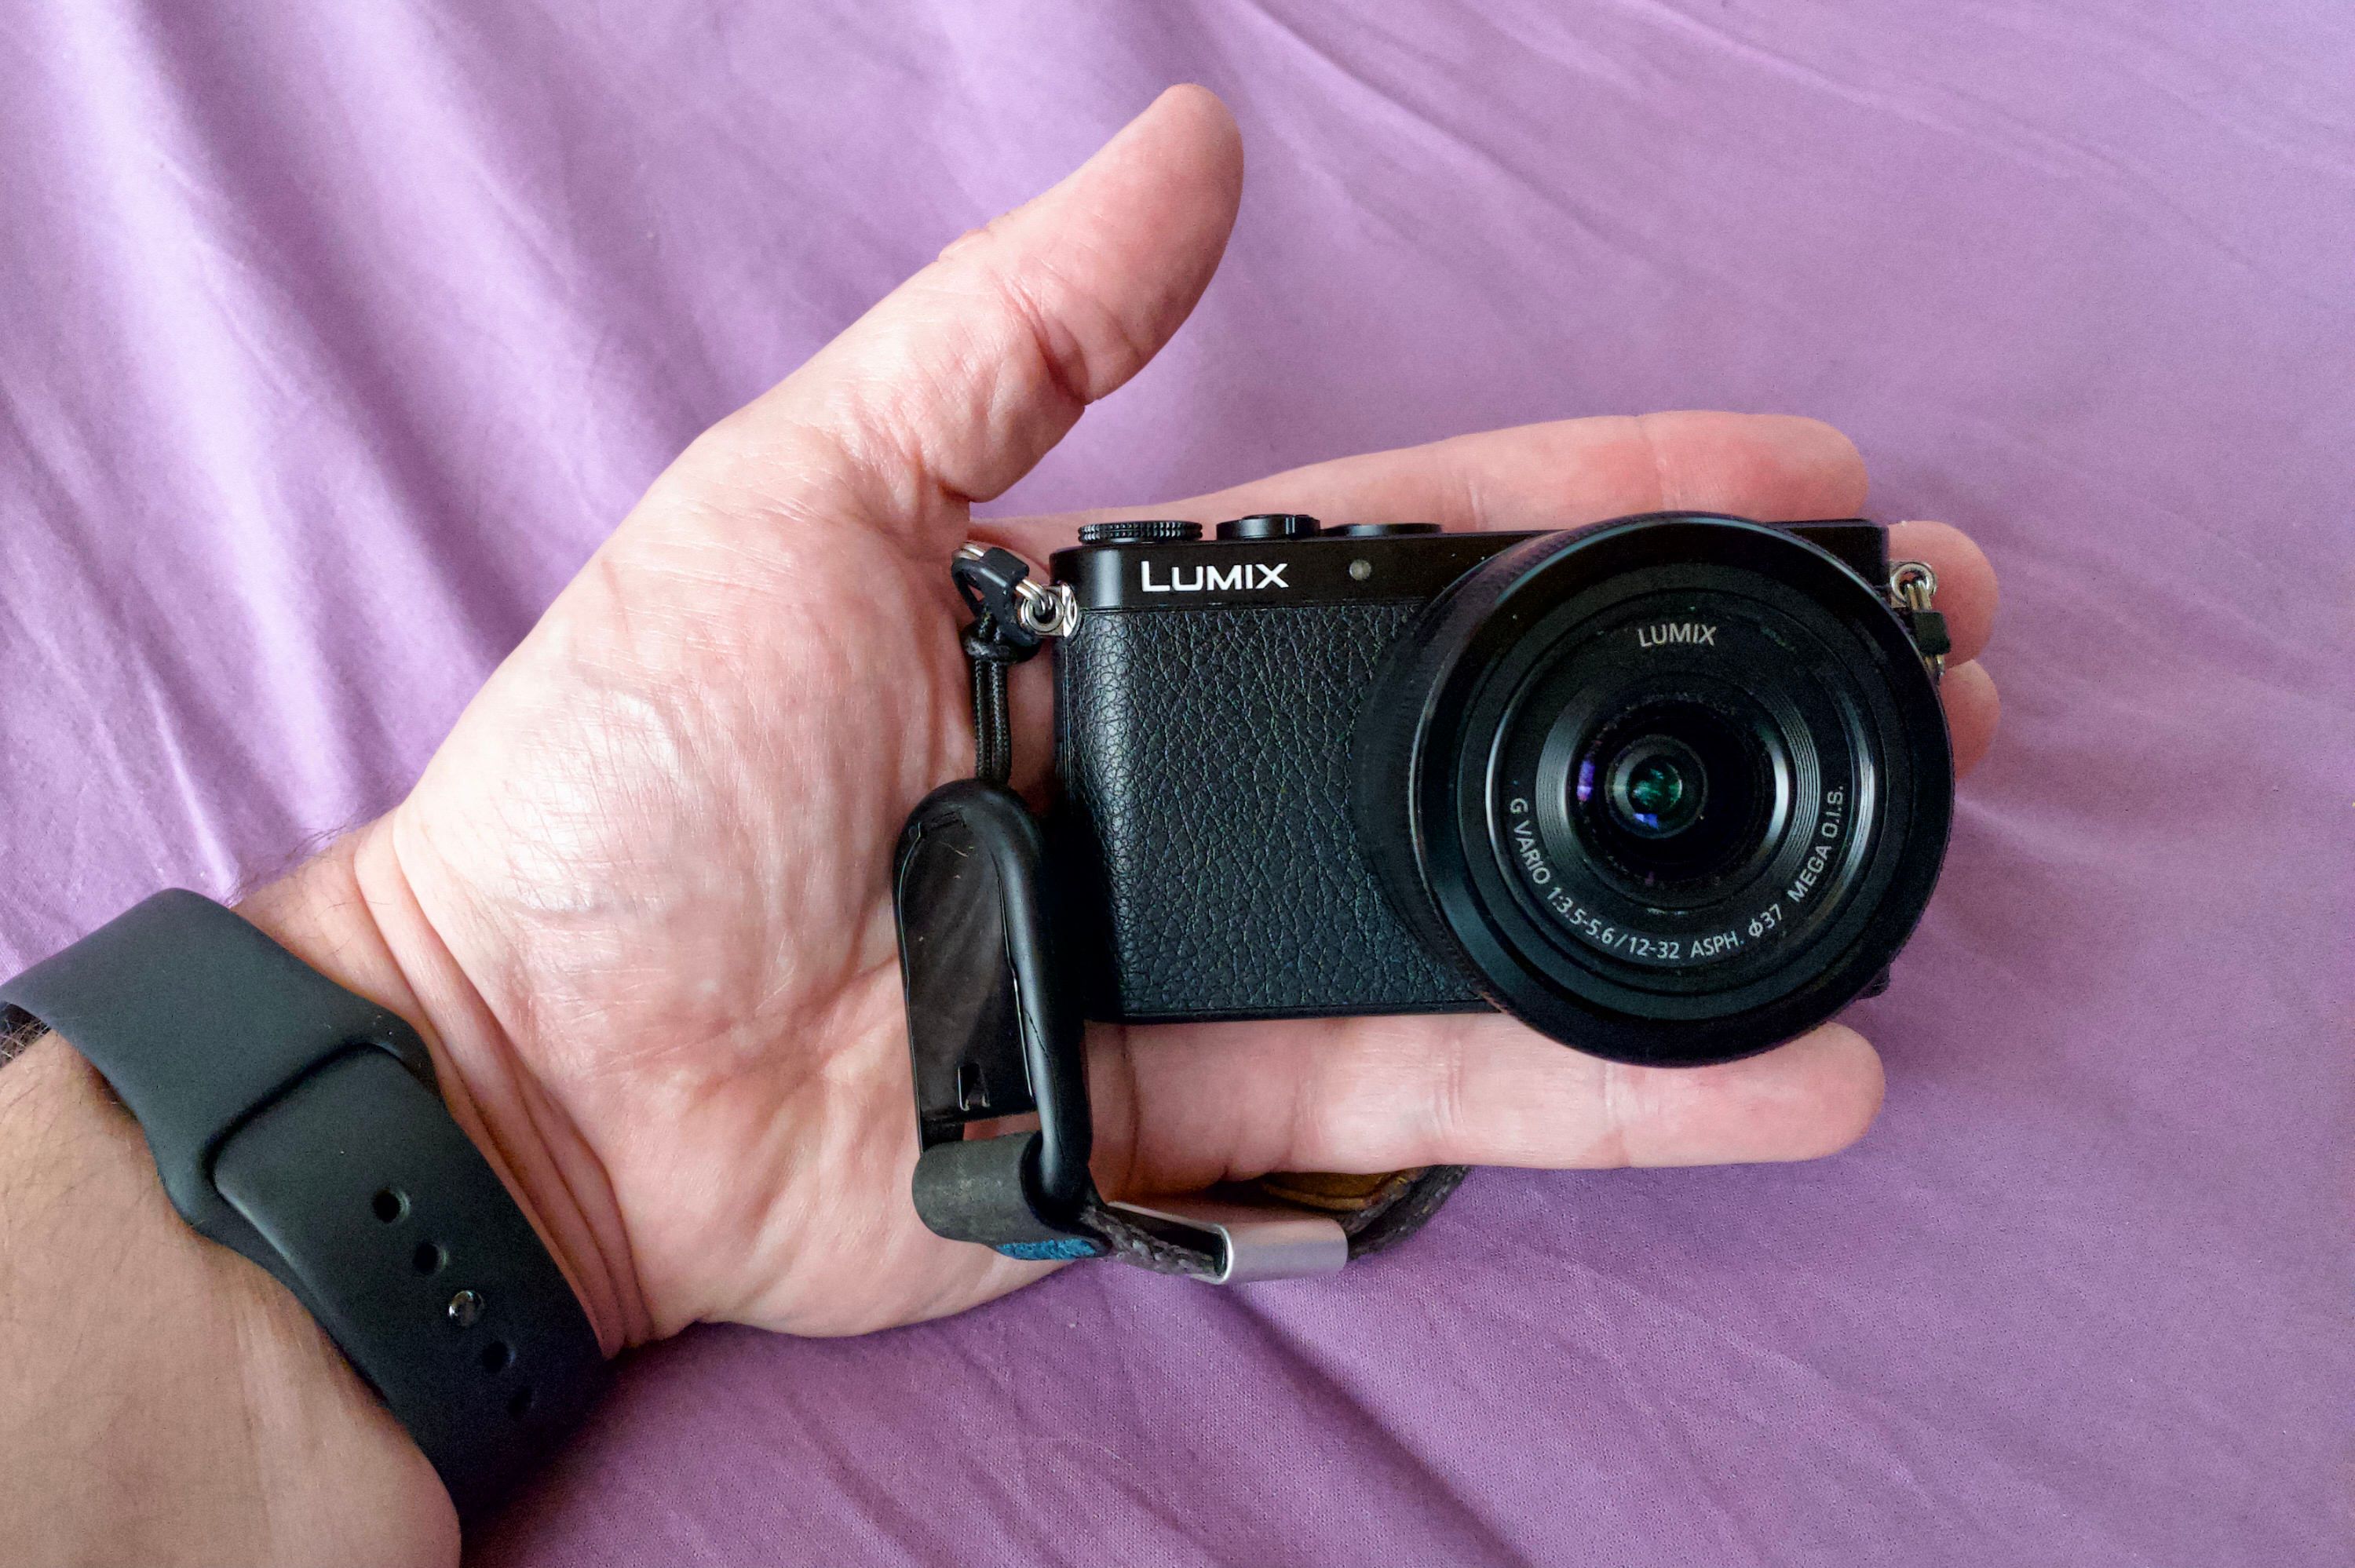 Smallest micro four thirds camera I know of